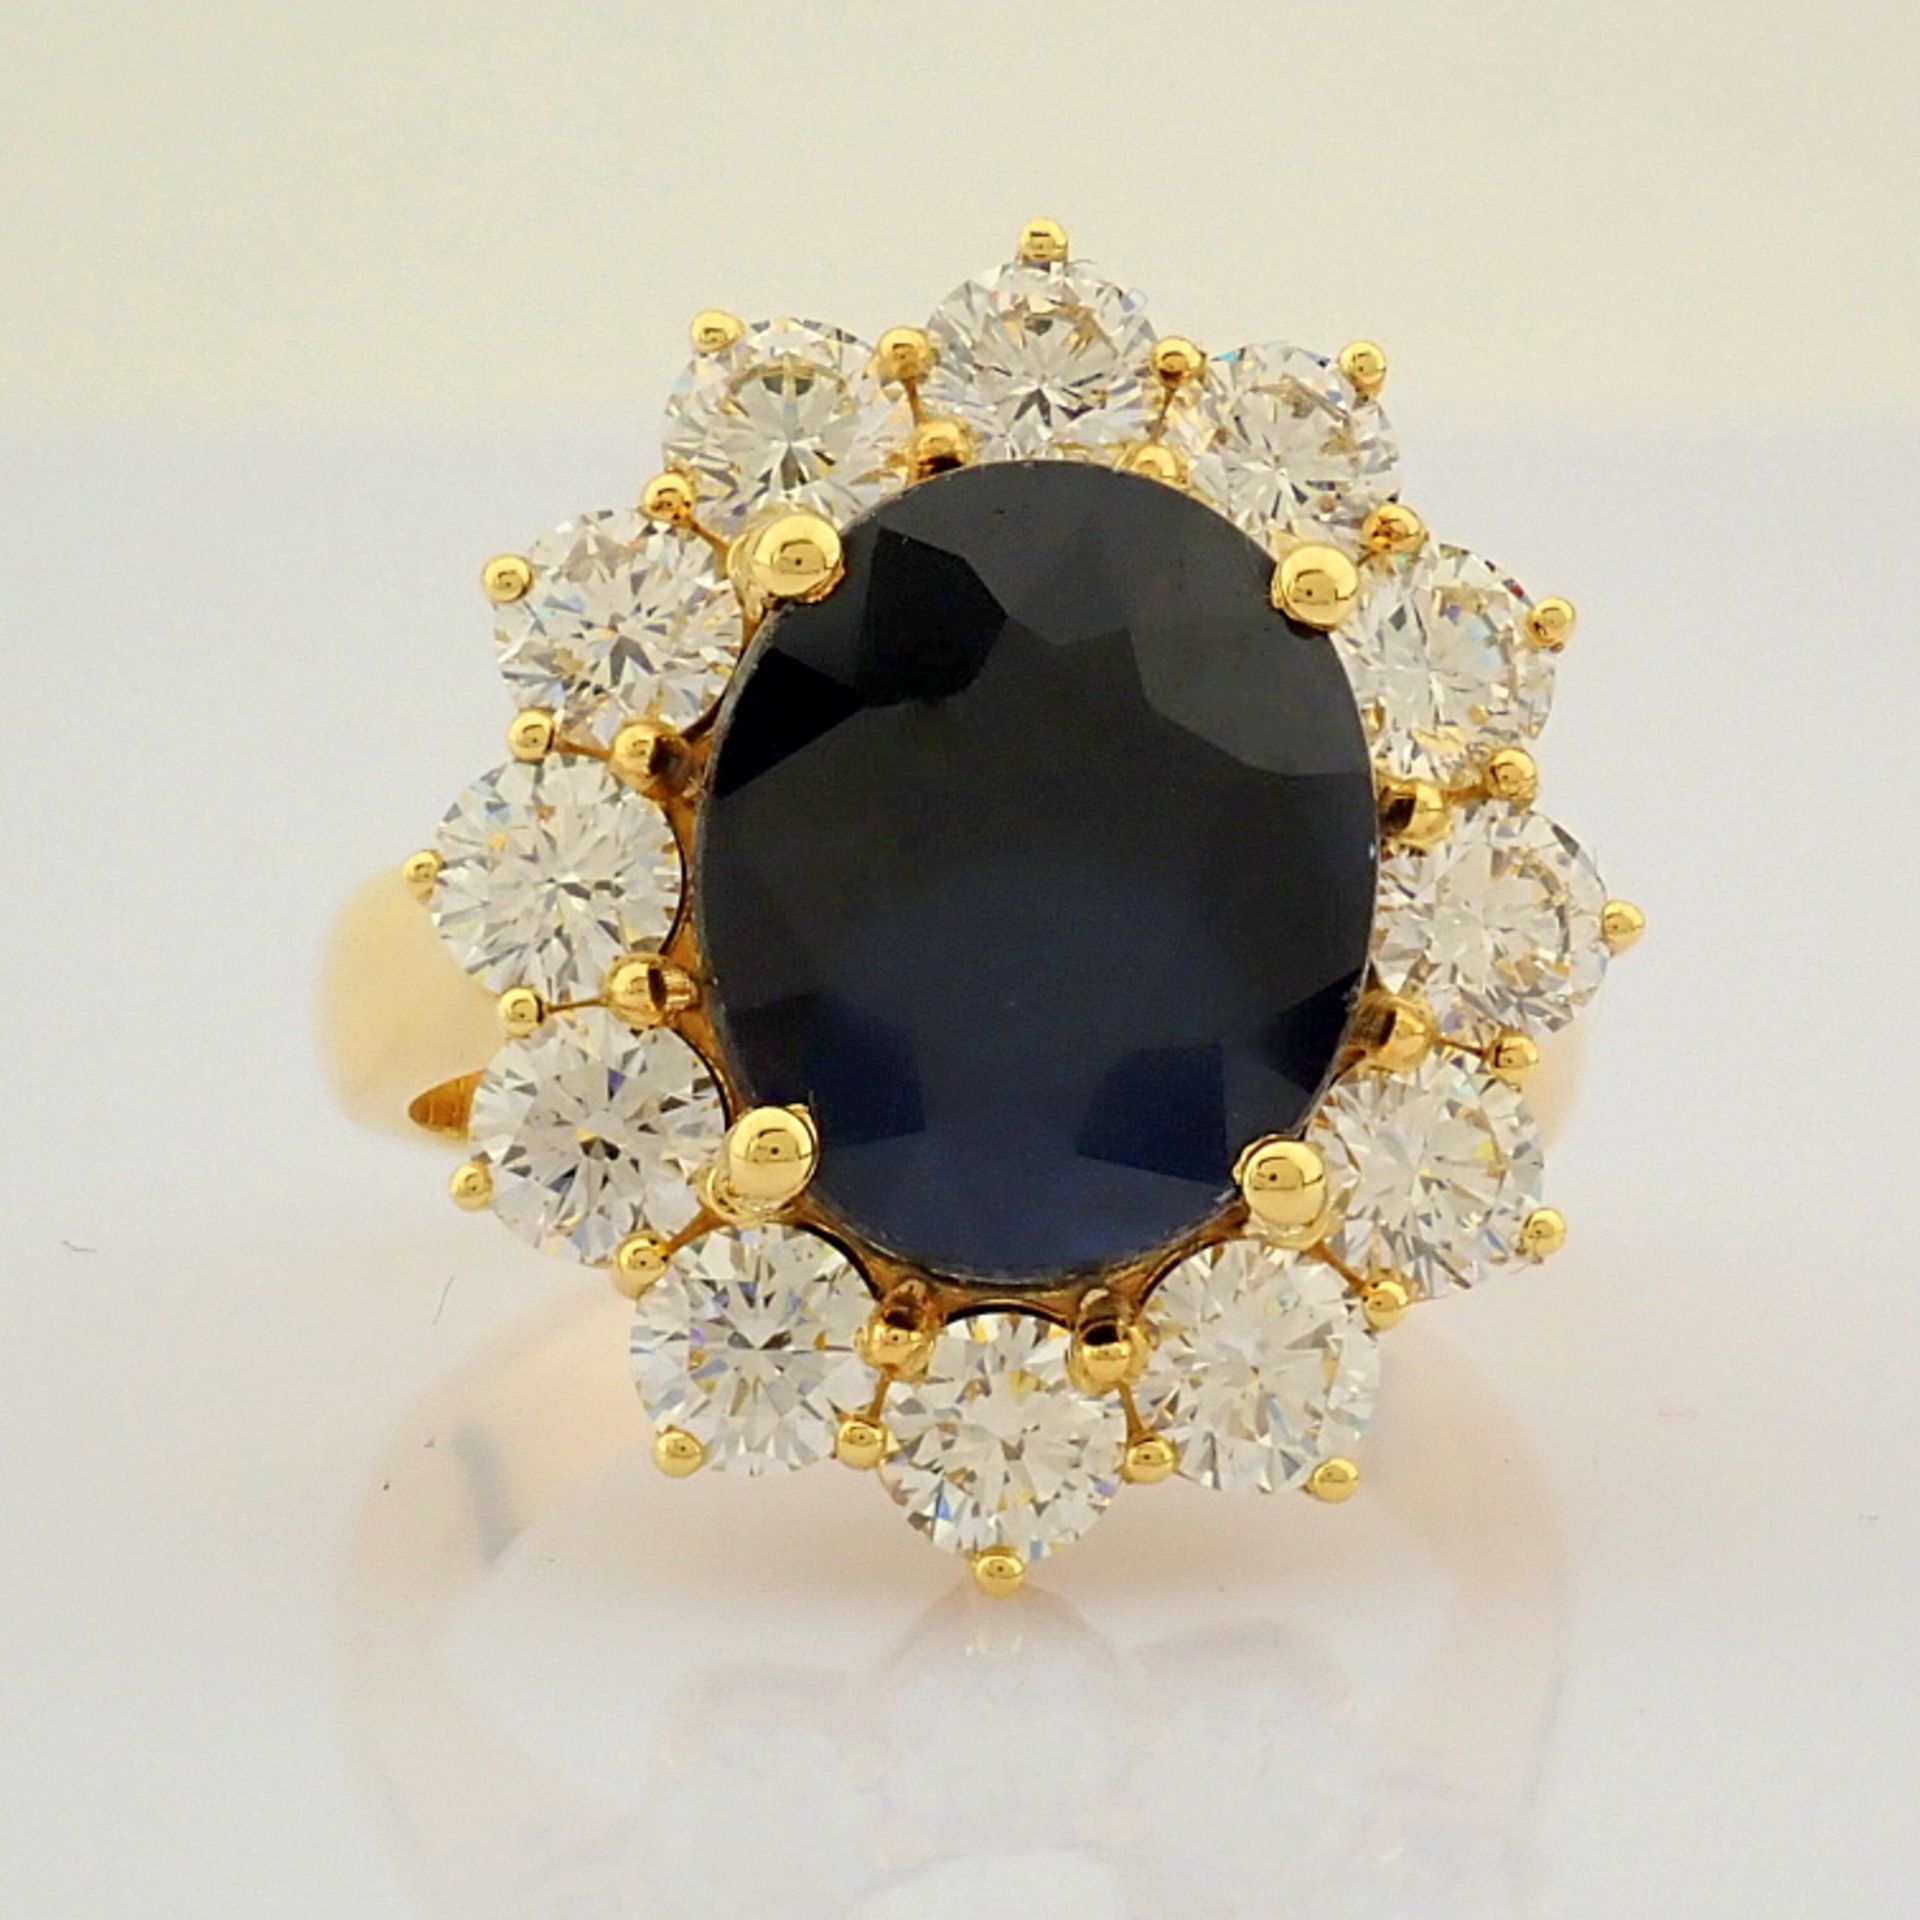 Certificated 18K Yellow Gold Sapphire & Diamond Ring (Total 8.14 ct Stone) - Image 4 of 8